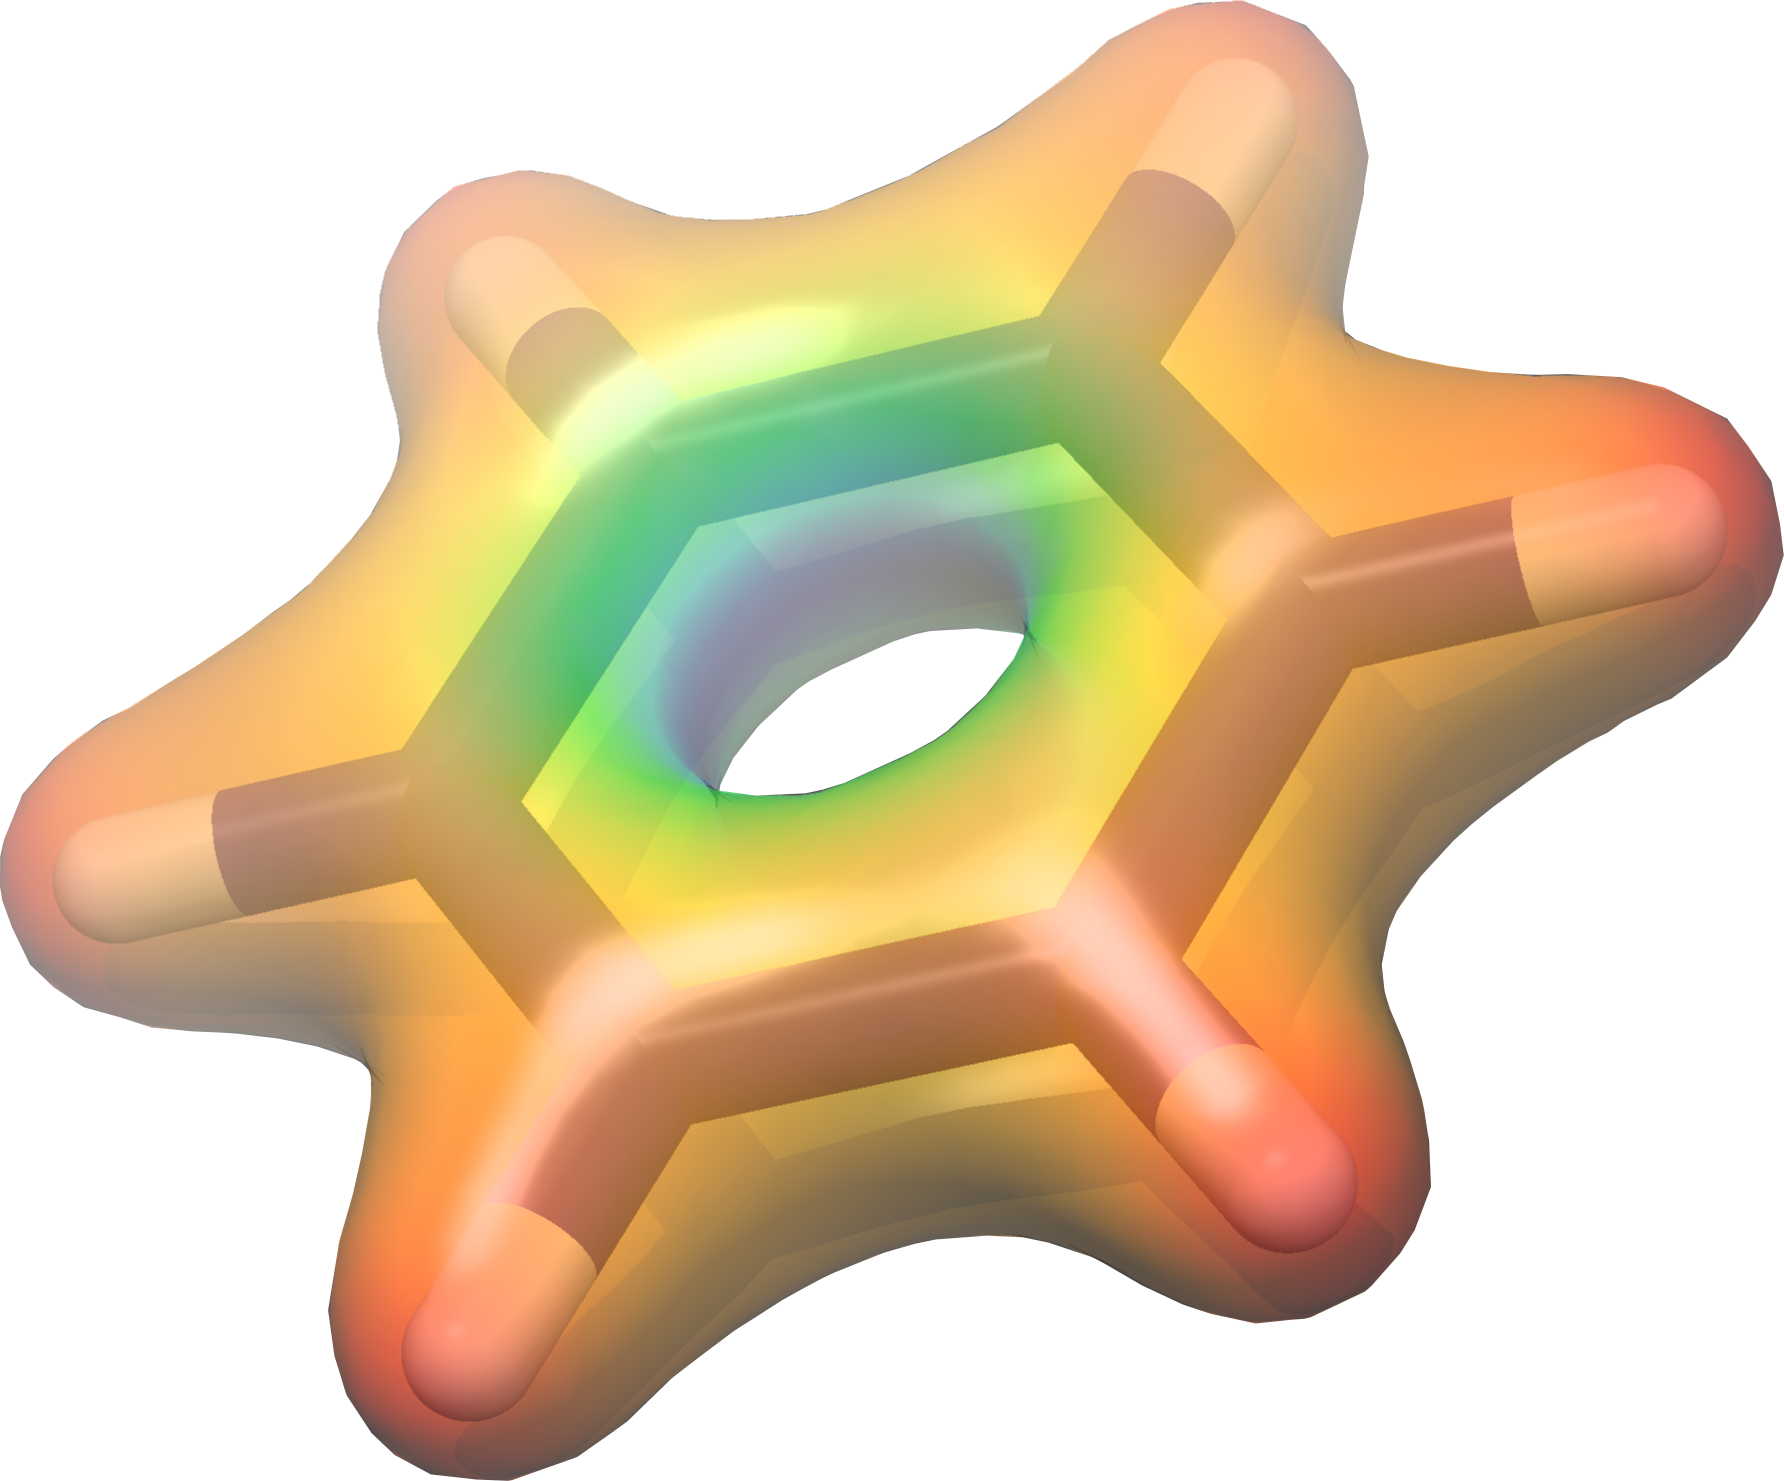 Ground-state density plotted with UCSF Chimera for the benzene molecule, colored according to the value of the electrostatic potential